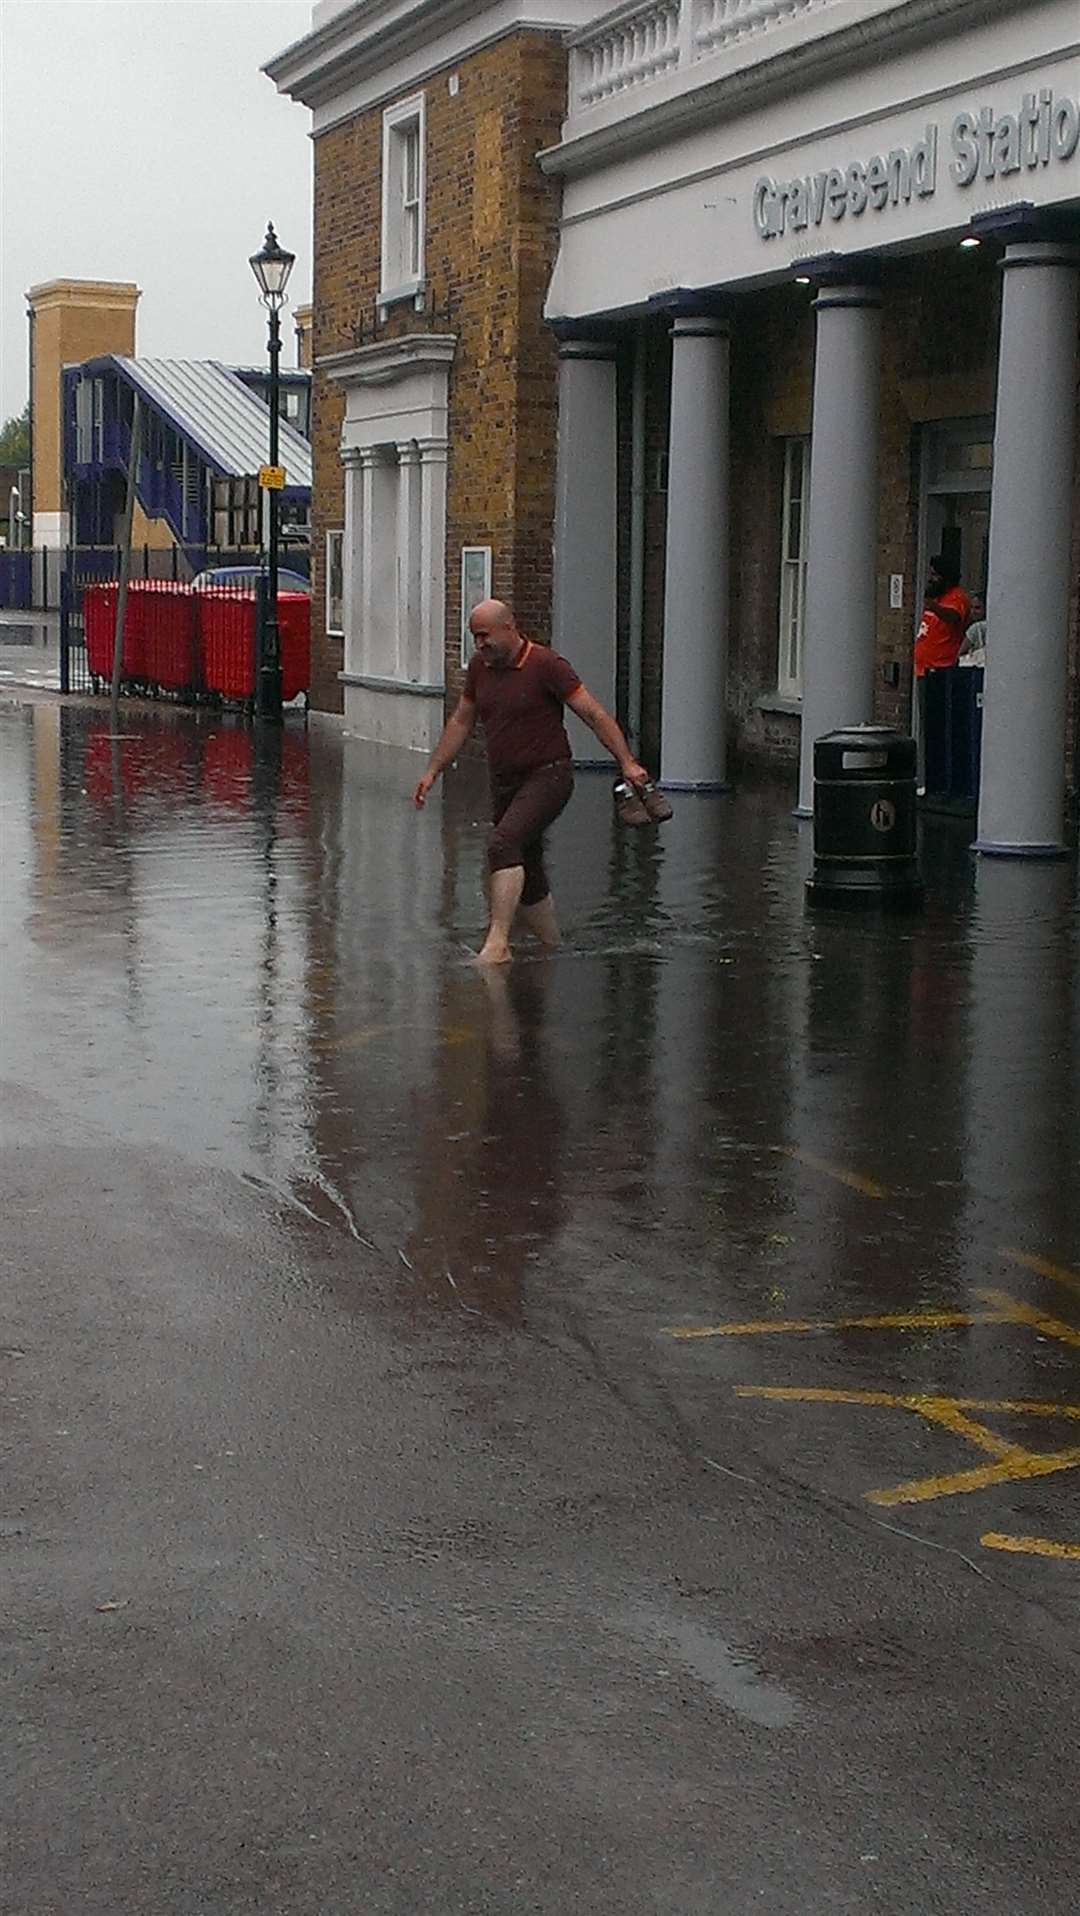 A passenger wades barefoot through the flood at Gravesend station on Sunday evening.